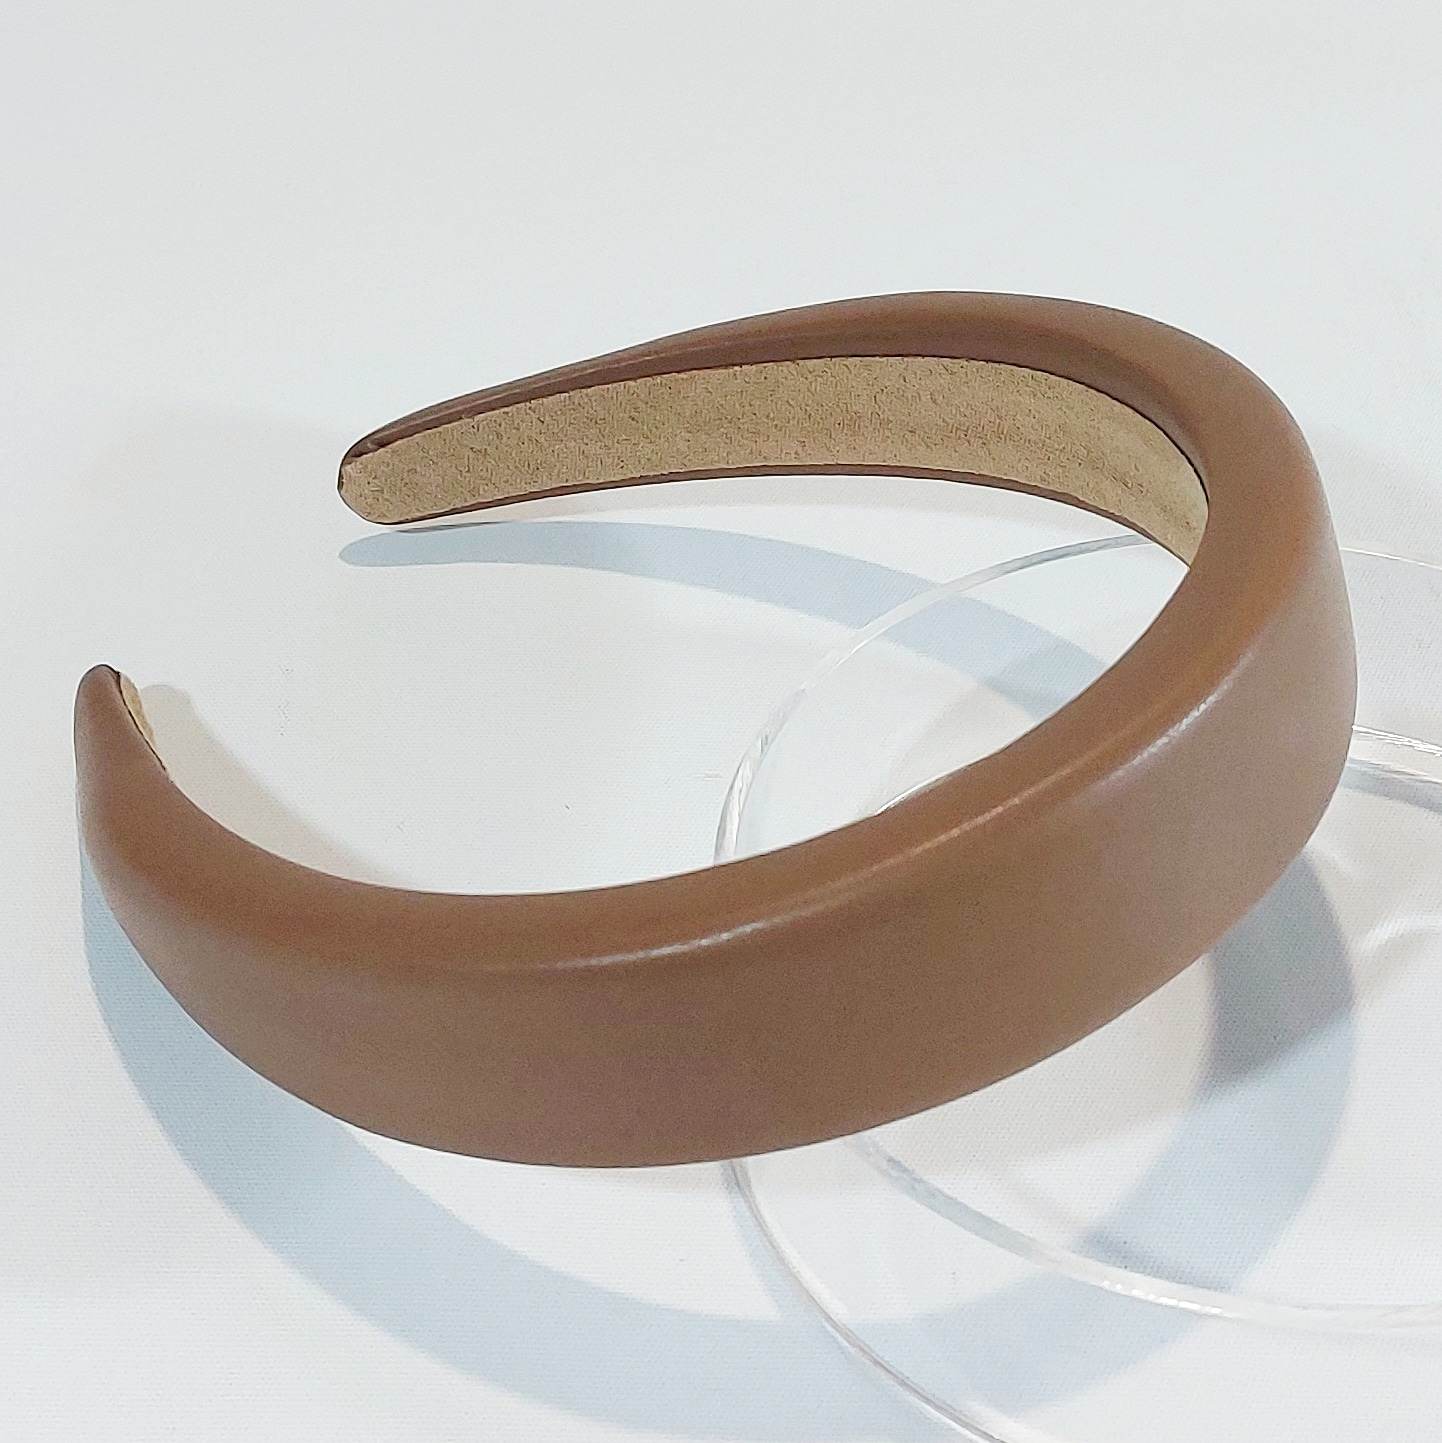 faux leather headband in tan for the winter carnival races